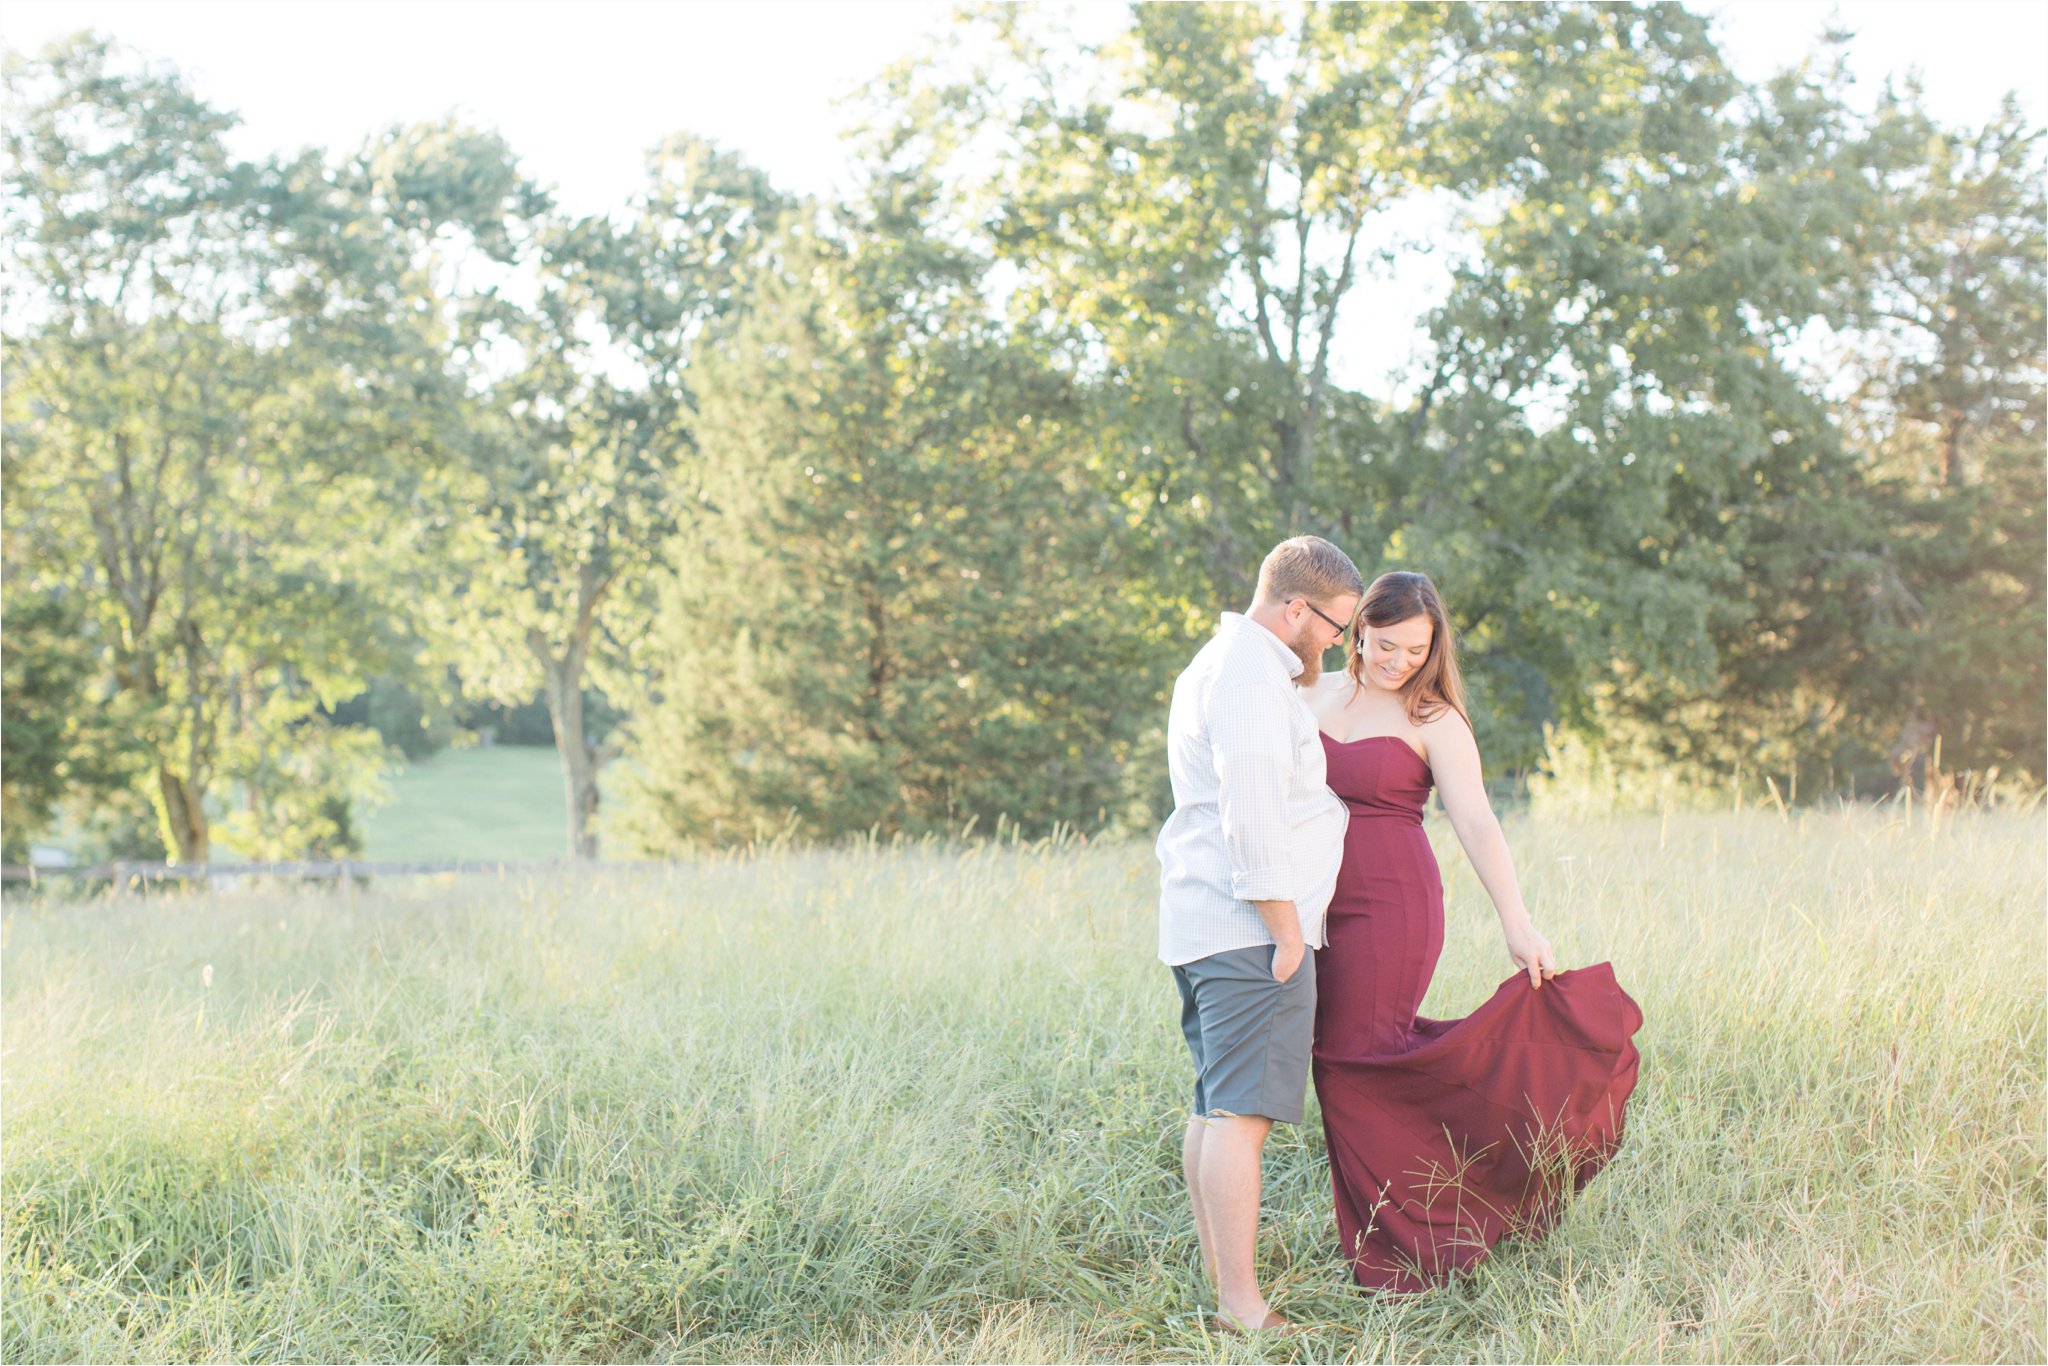 Greenville, SC Engagement Session | Field Engagement Session | South Carolina Wedding Photography | Christa Rene Photography